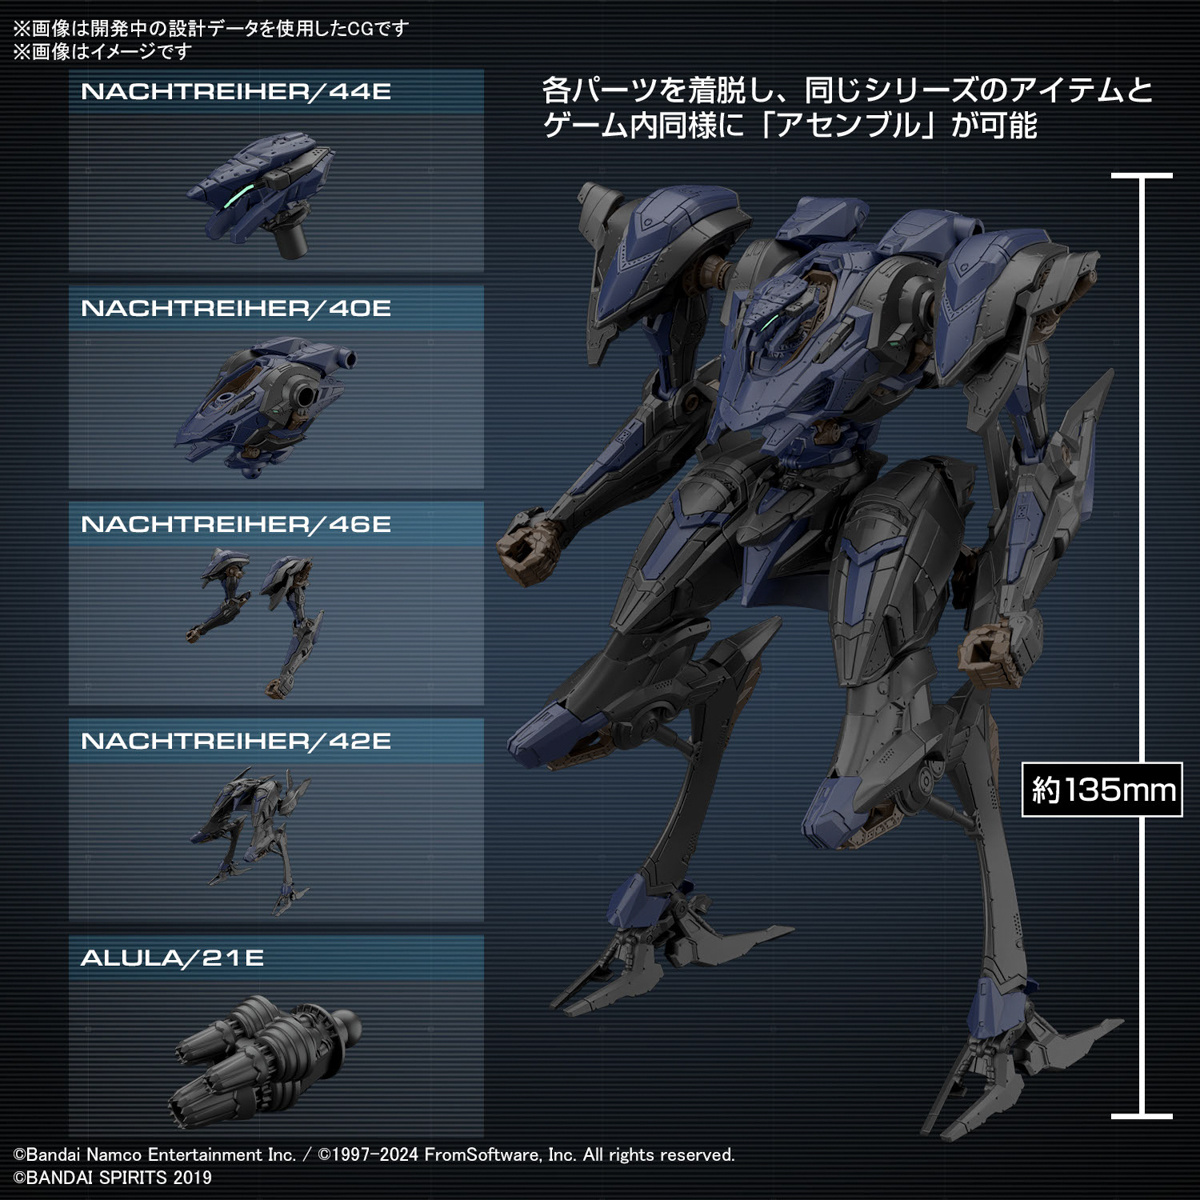 Wait, how did I miss that you can finally preorder Armored Core 6 model kits?